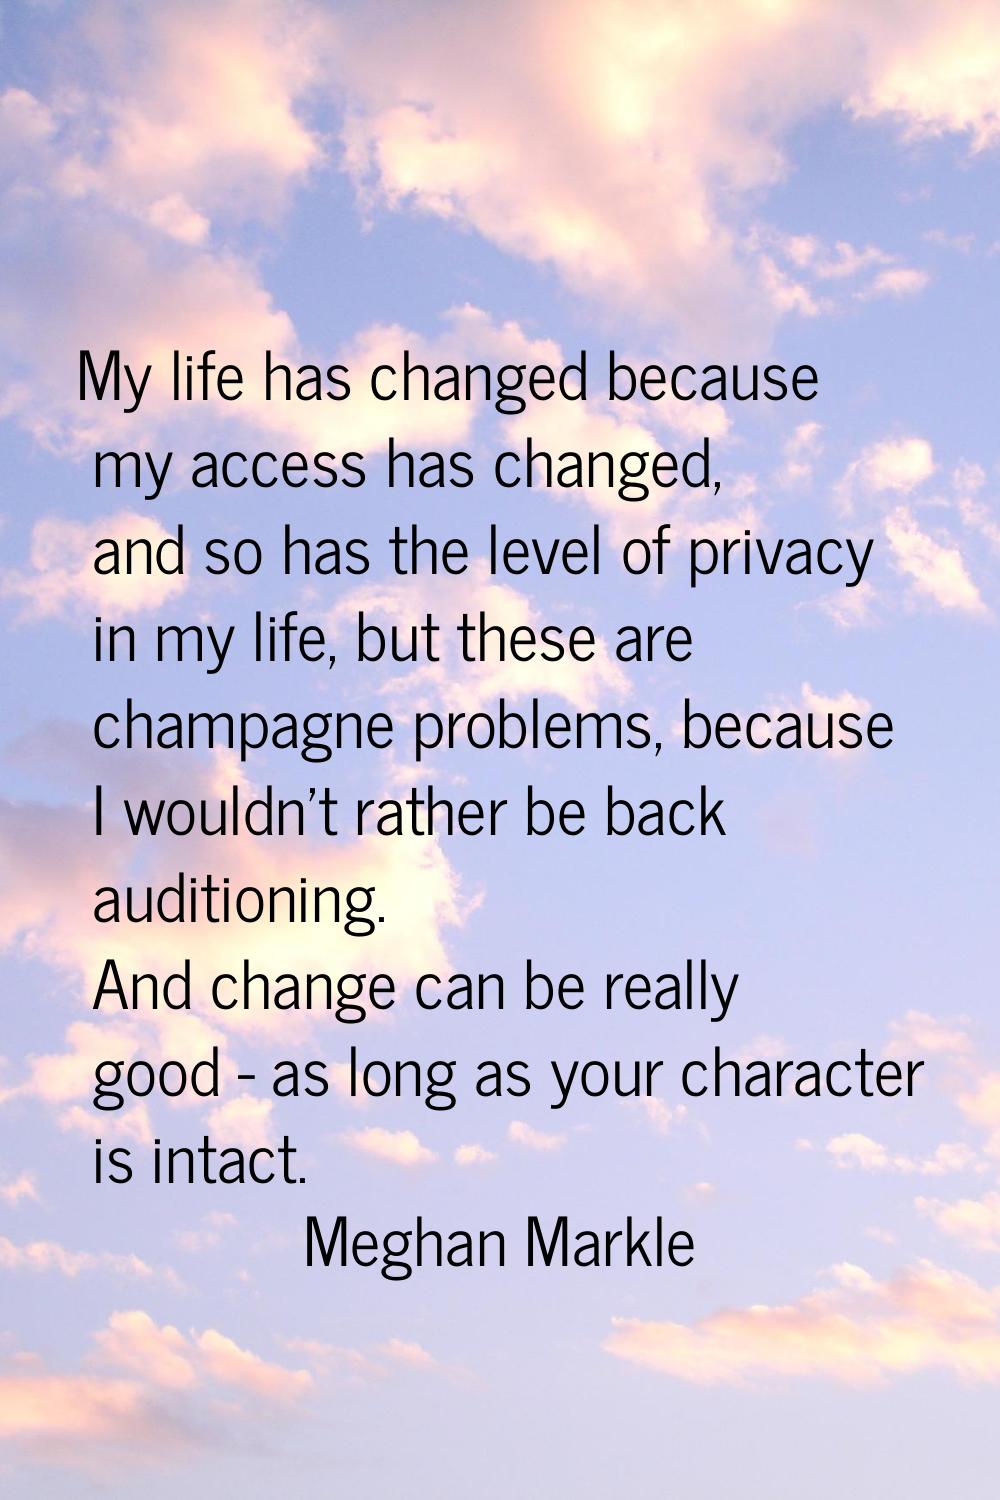 My life has changed because my access has changed, and so has the level of privacy in my life, but 